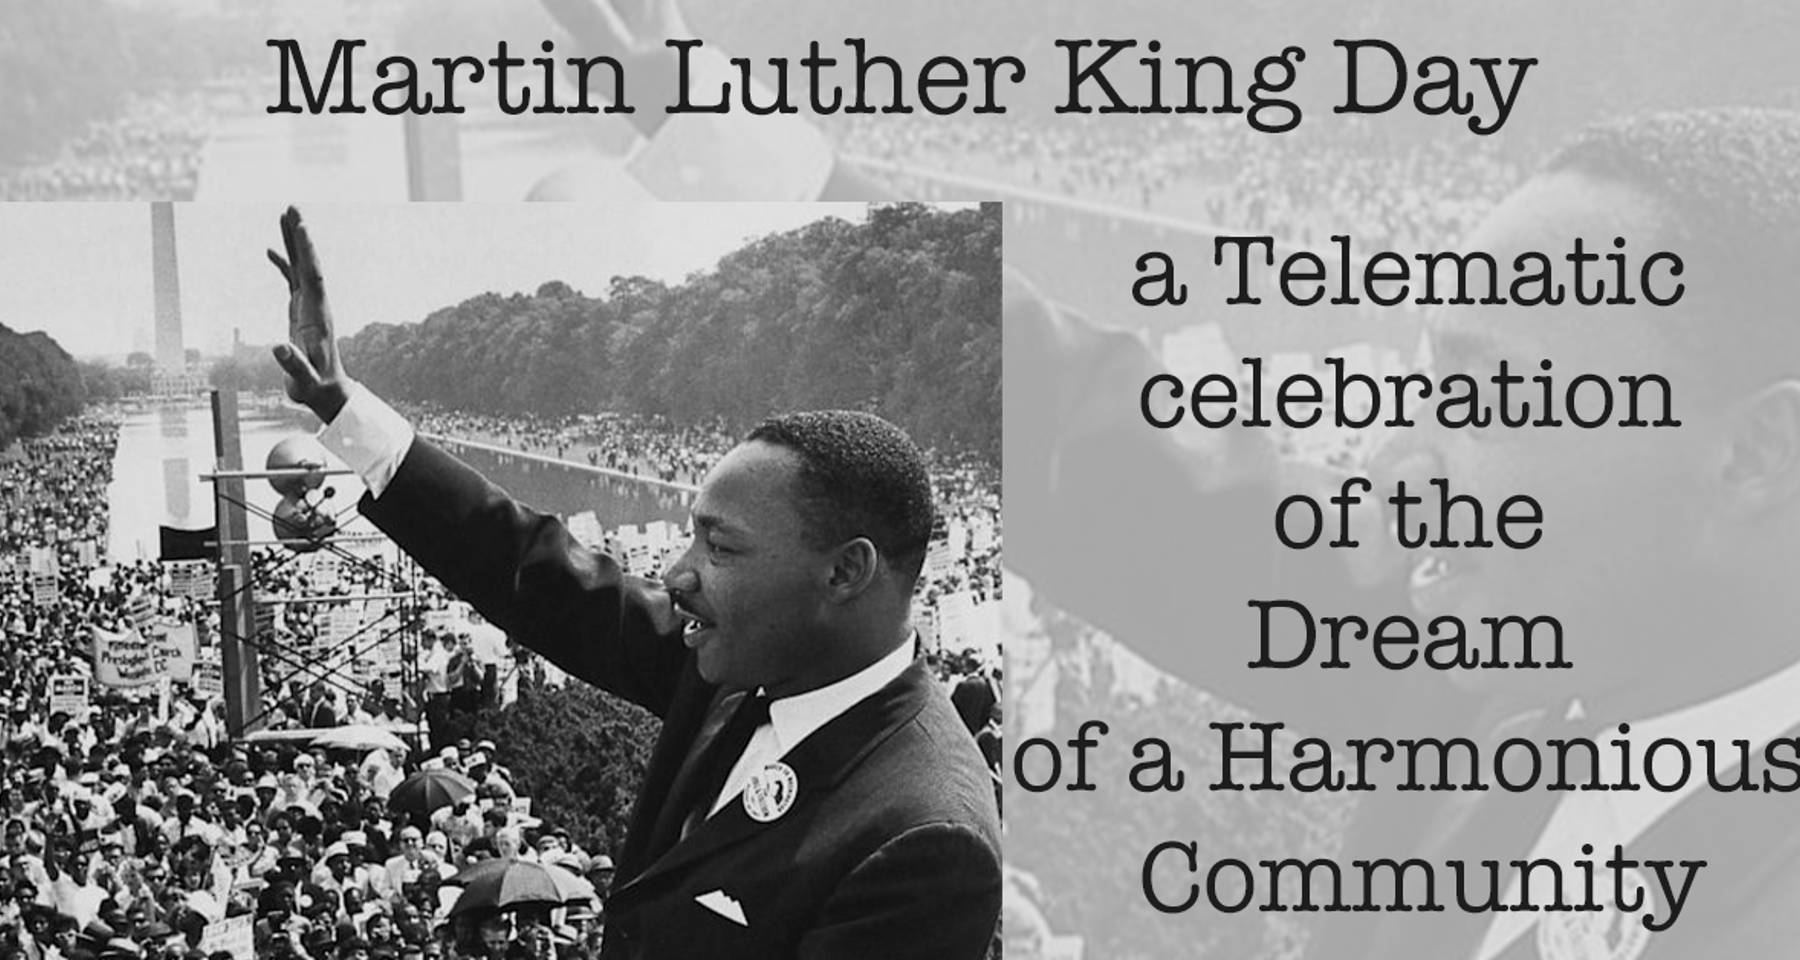 Martin Luther King Day - a telematic celebration of the Dream of a Harmonious Community